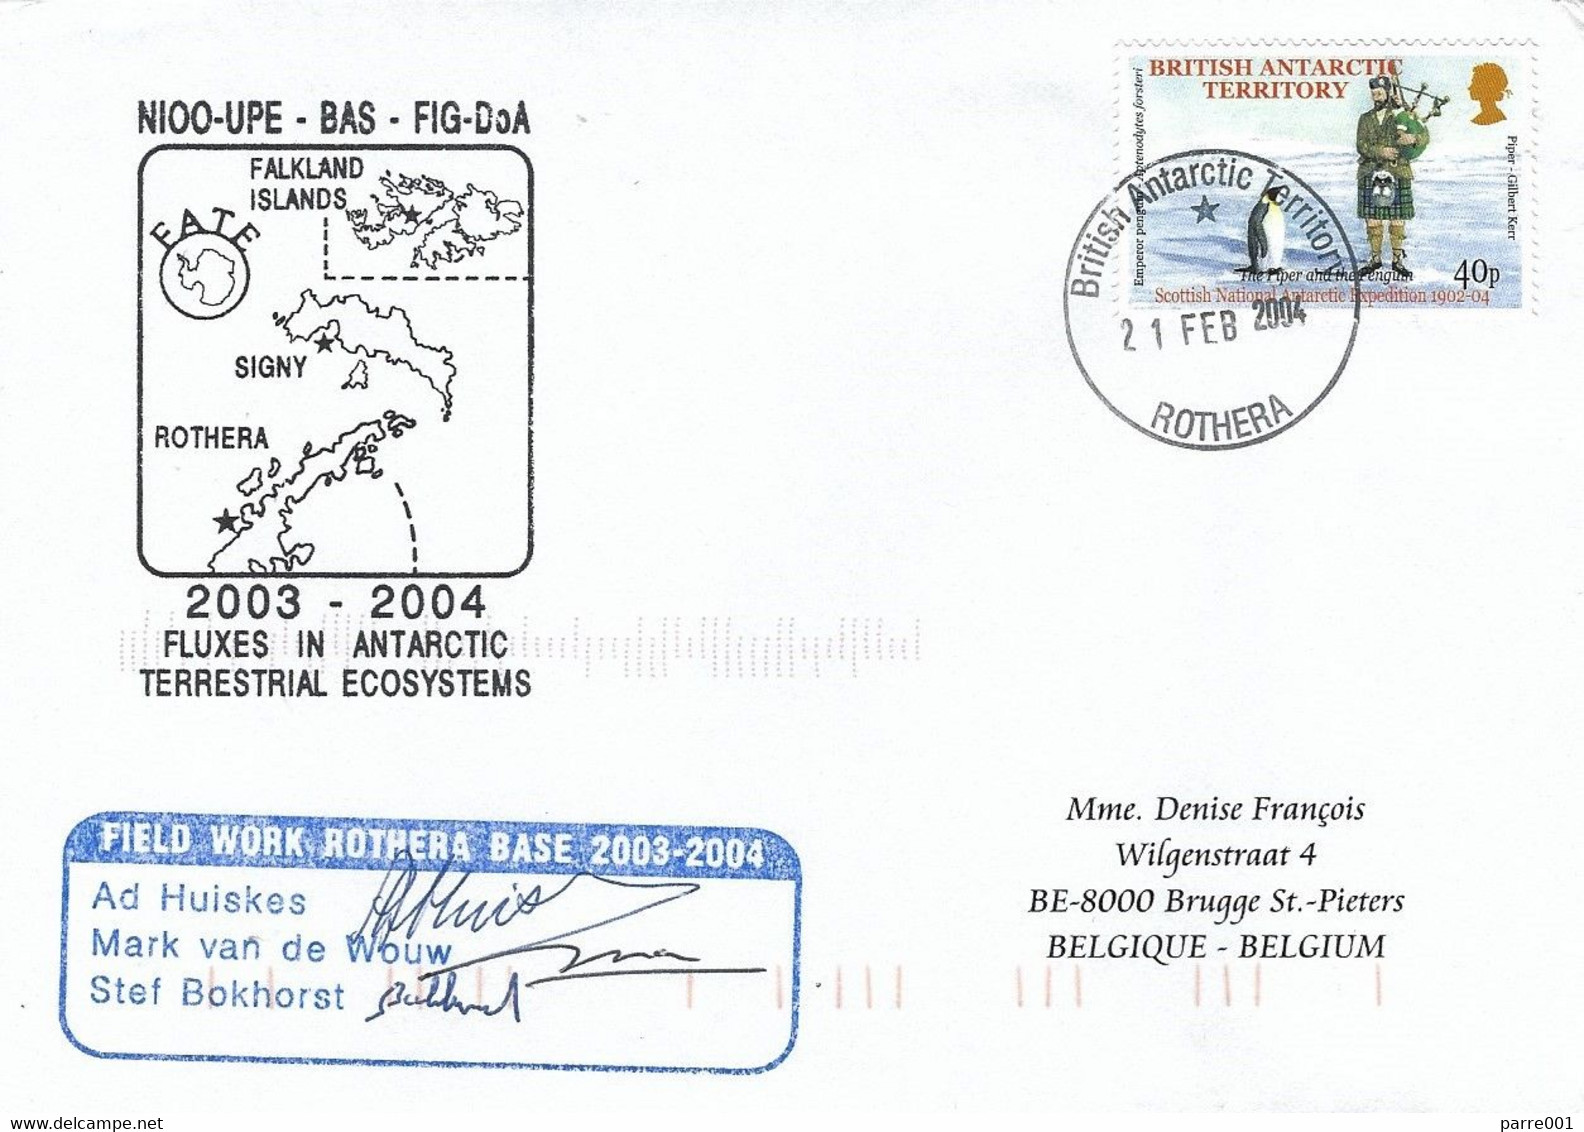 BAT 2004 Rothera Antarctica Netherlands Institute Of Ecology-Unit For Polar Ecology Fluxes Terrestrial Ecosystems Cover - Forschungsprogramme